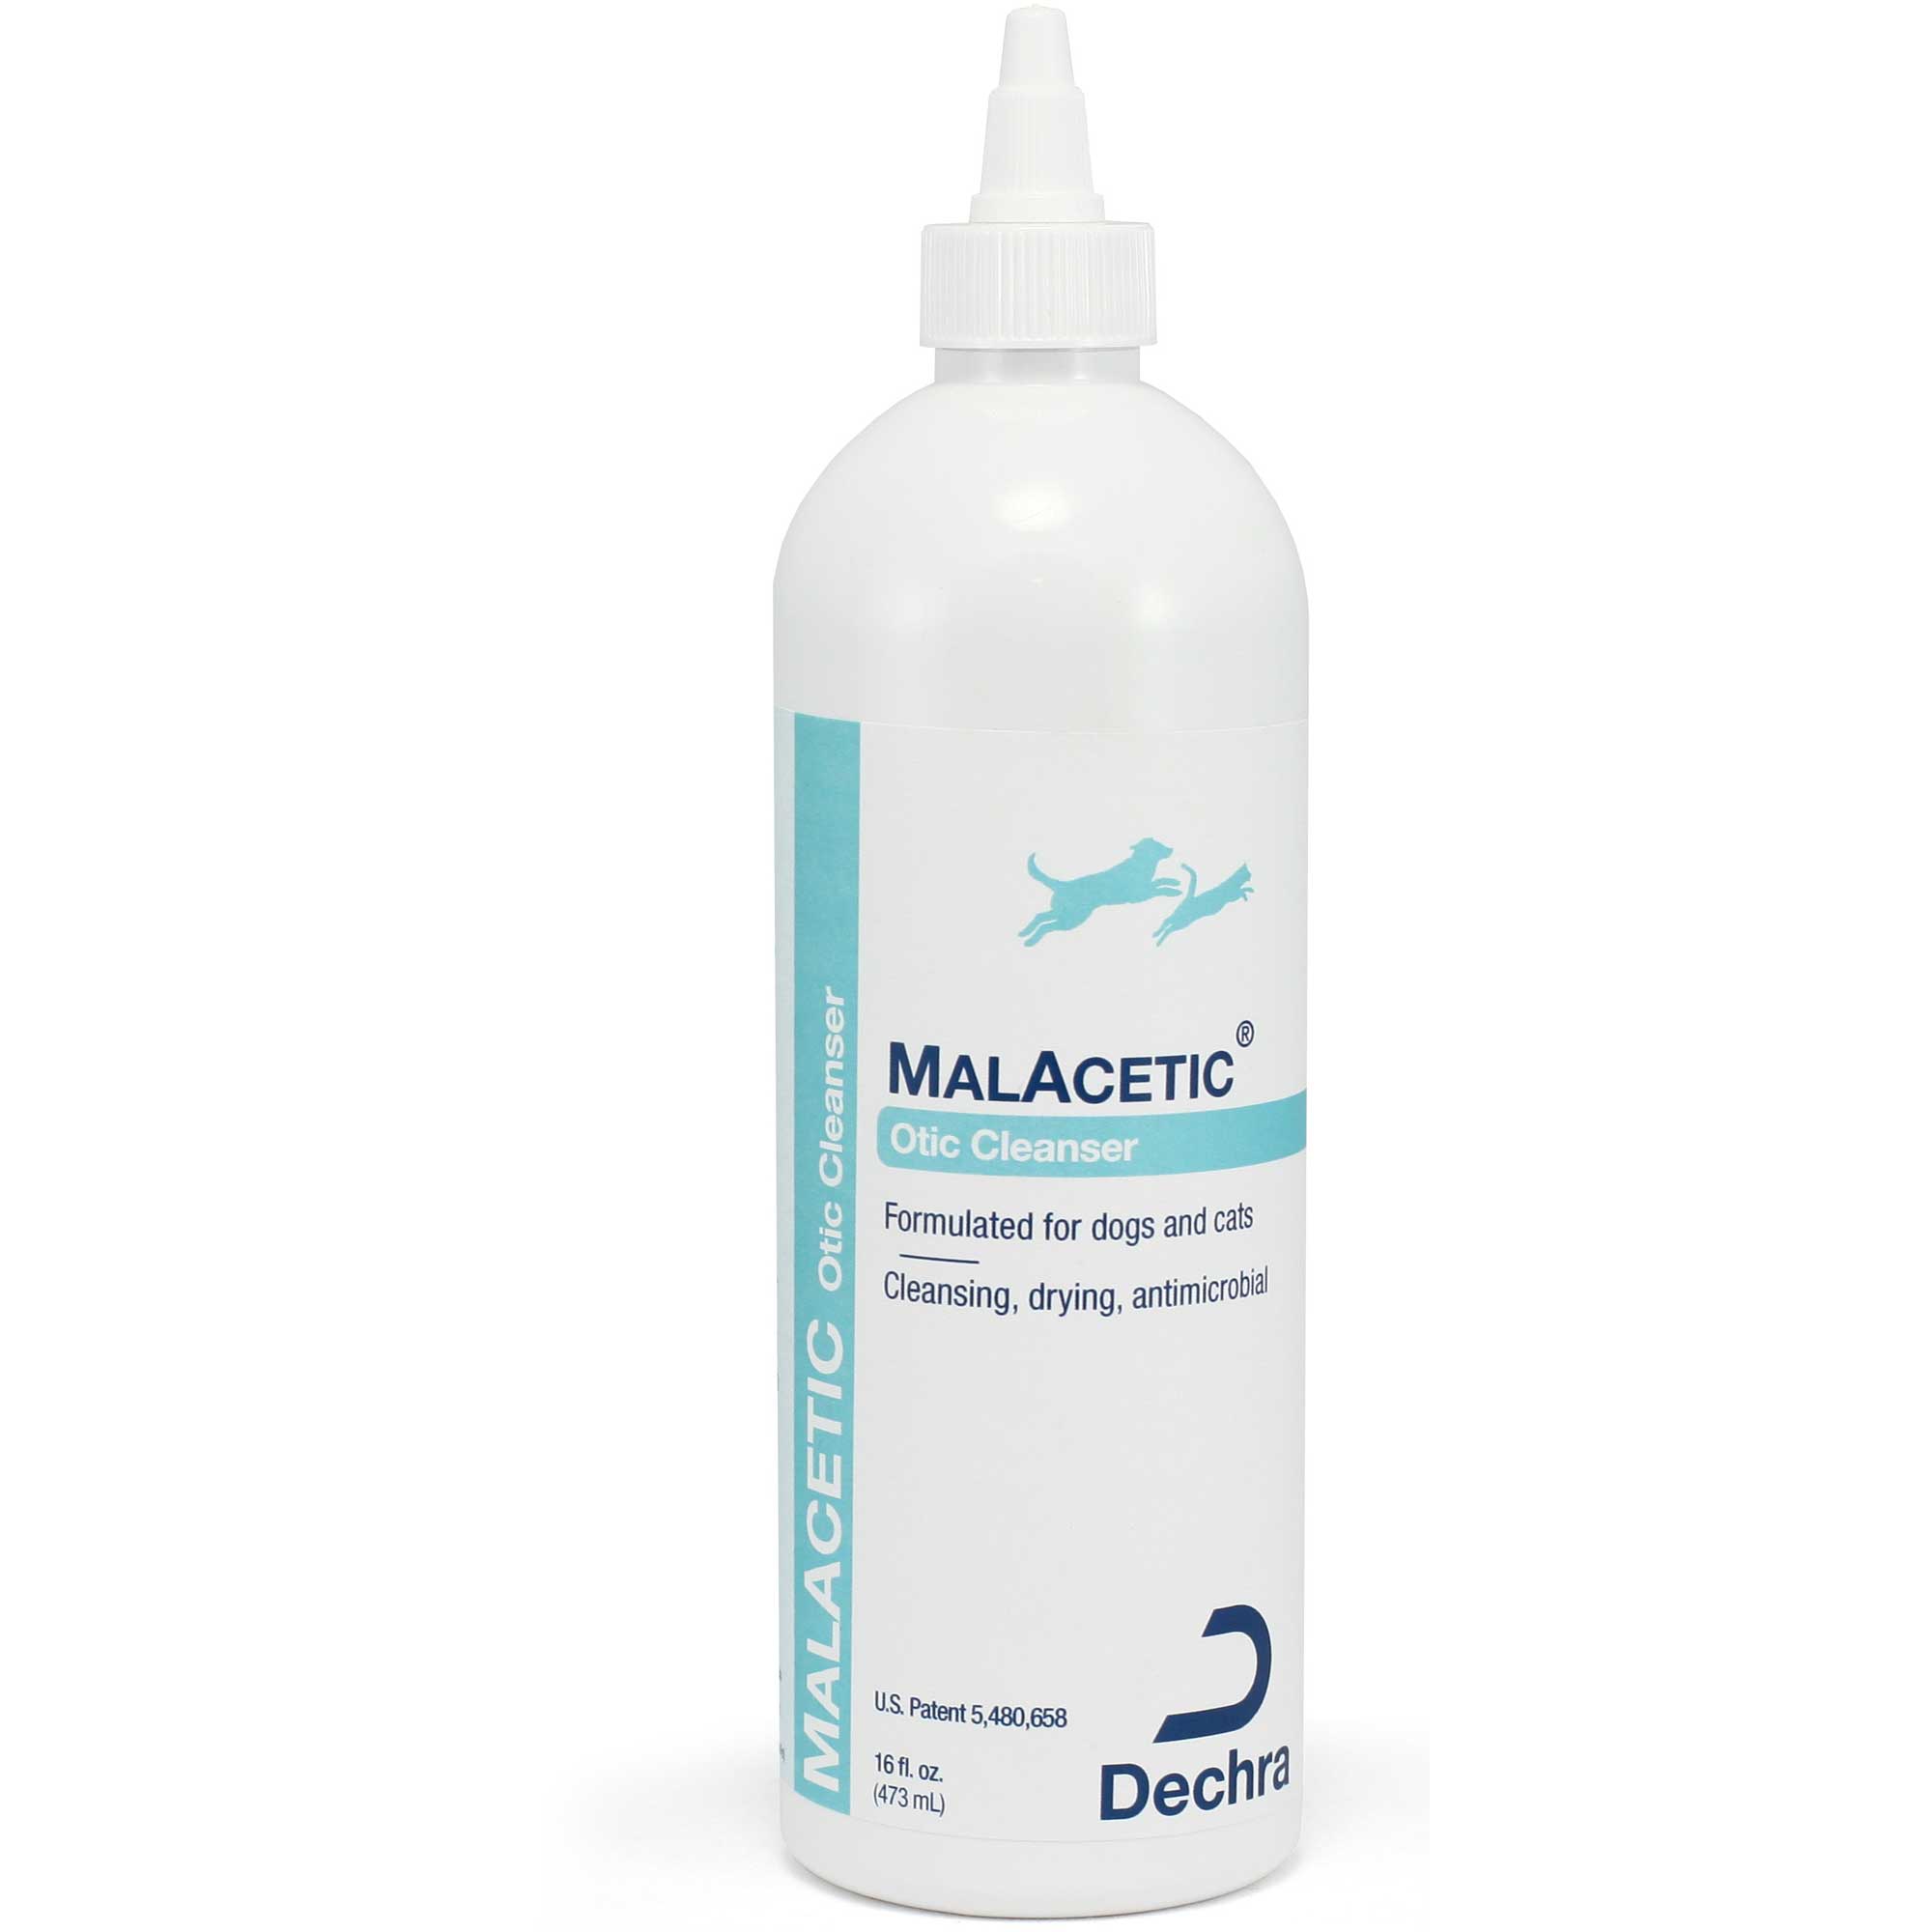 MalAcetic Otic Cleanser Usage